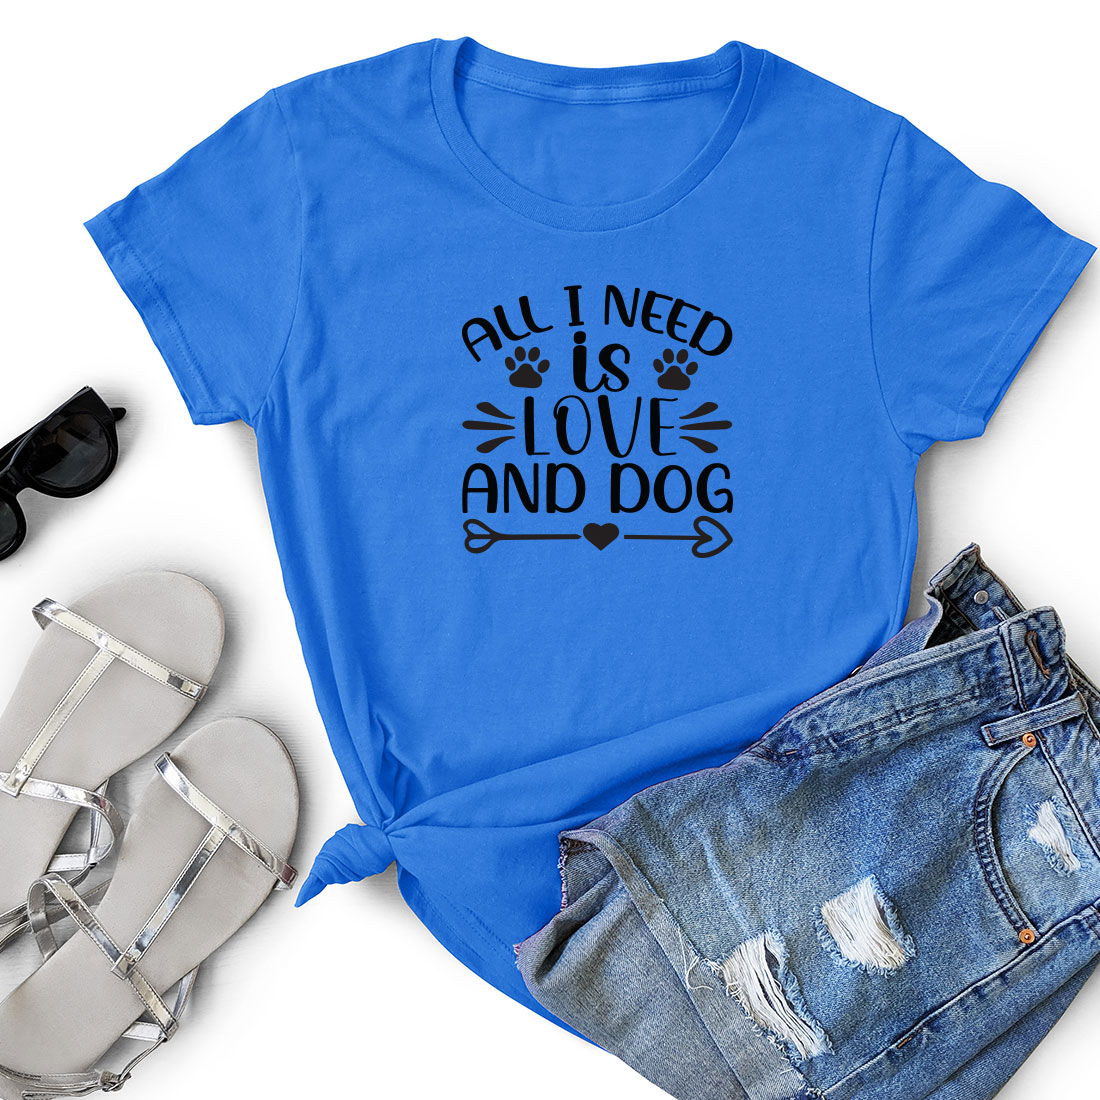 T - shirt that says all i need is love and dog.